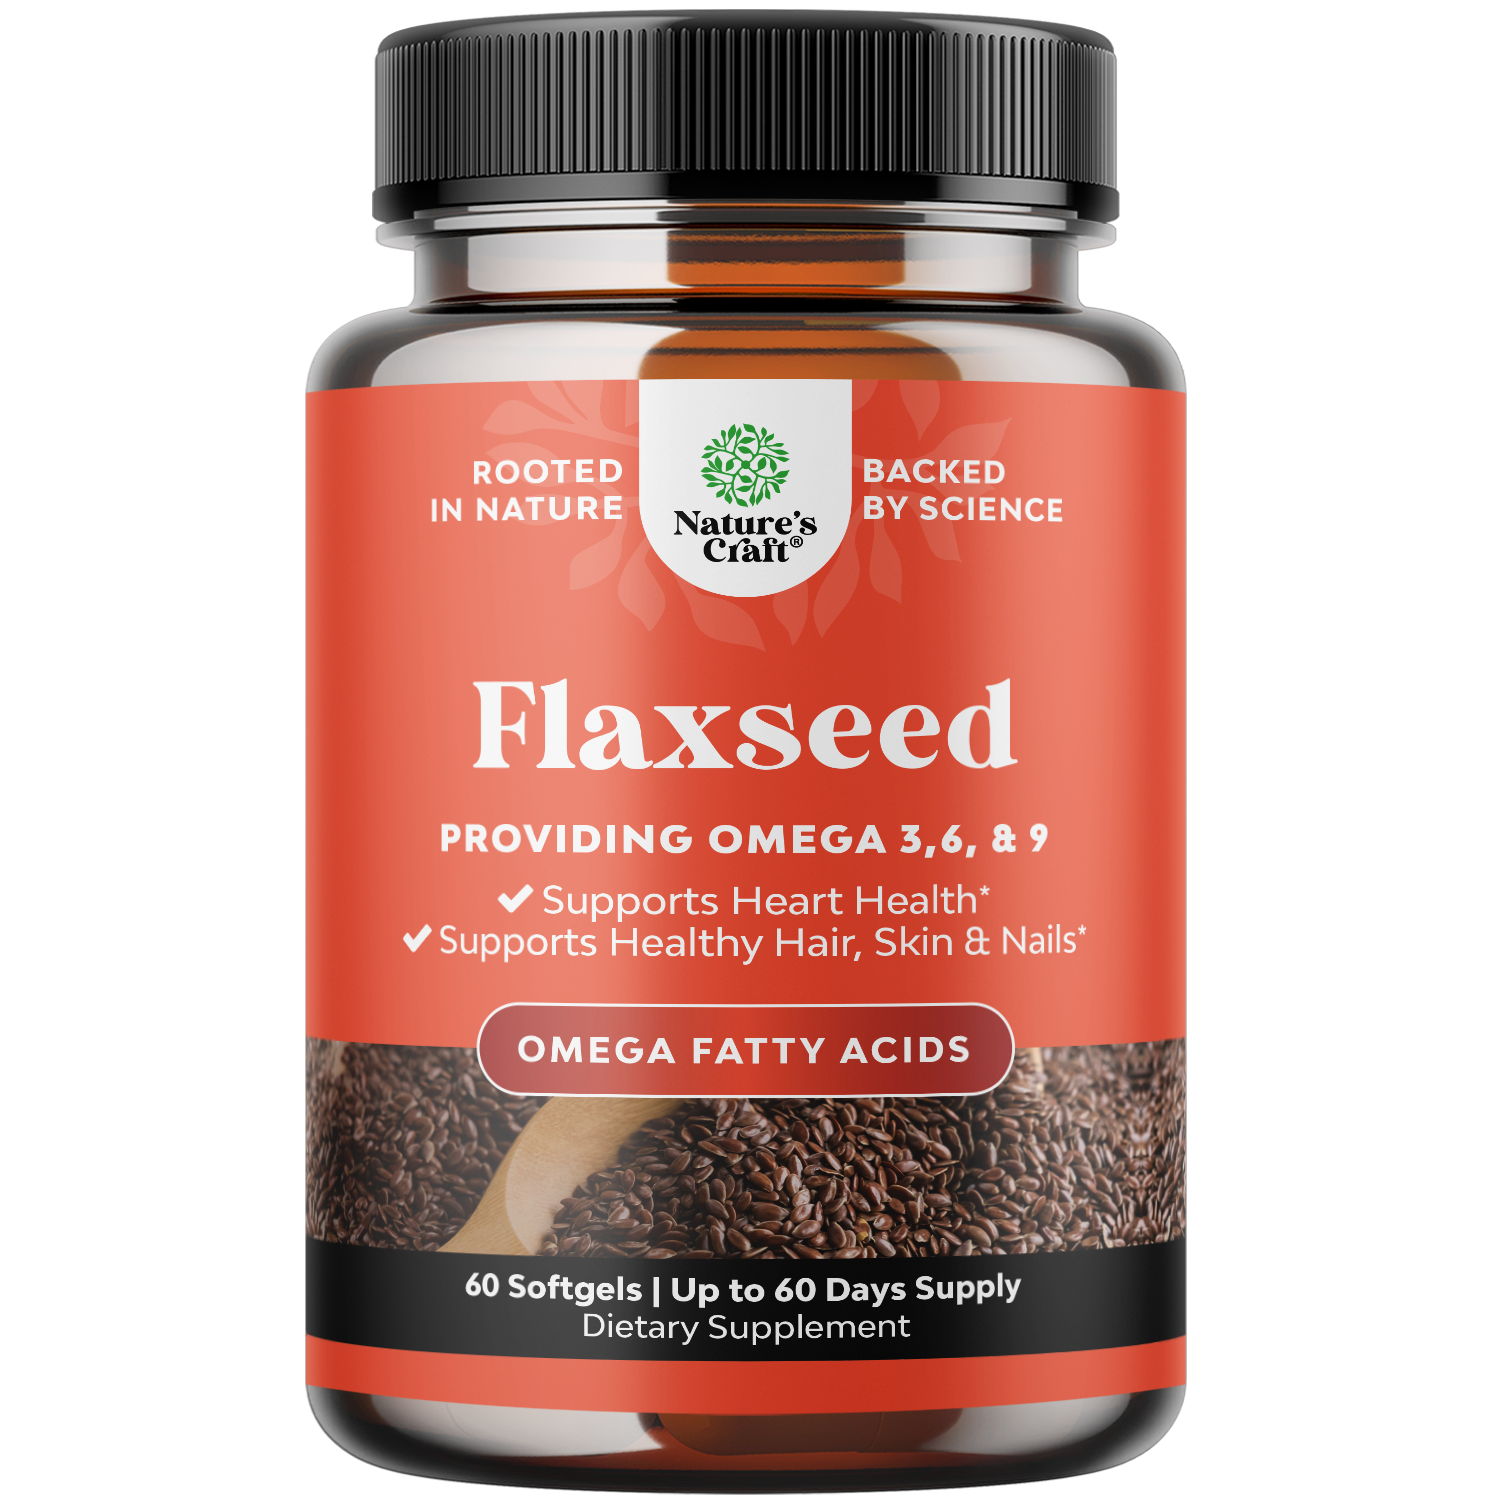 Flaxseed for mood improvement